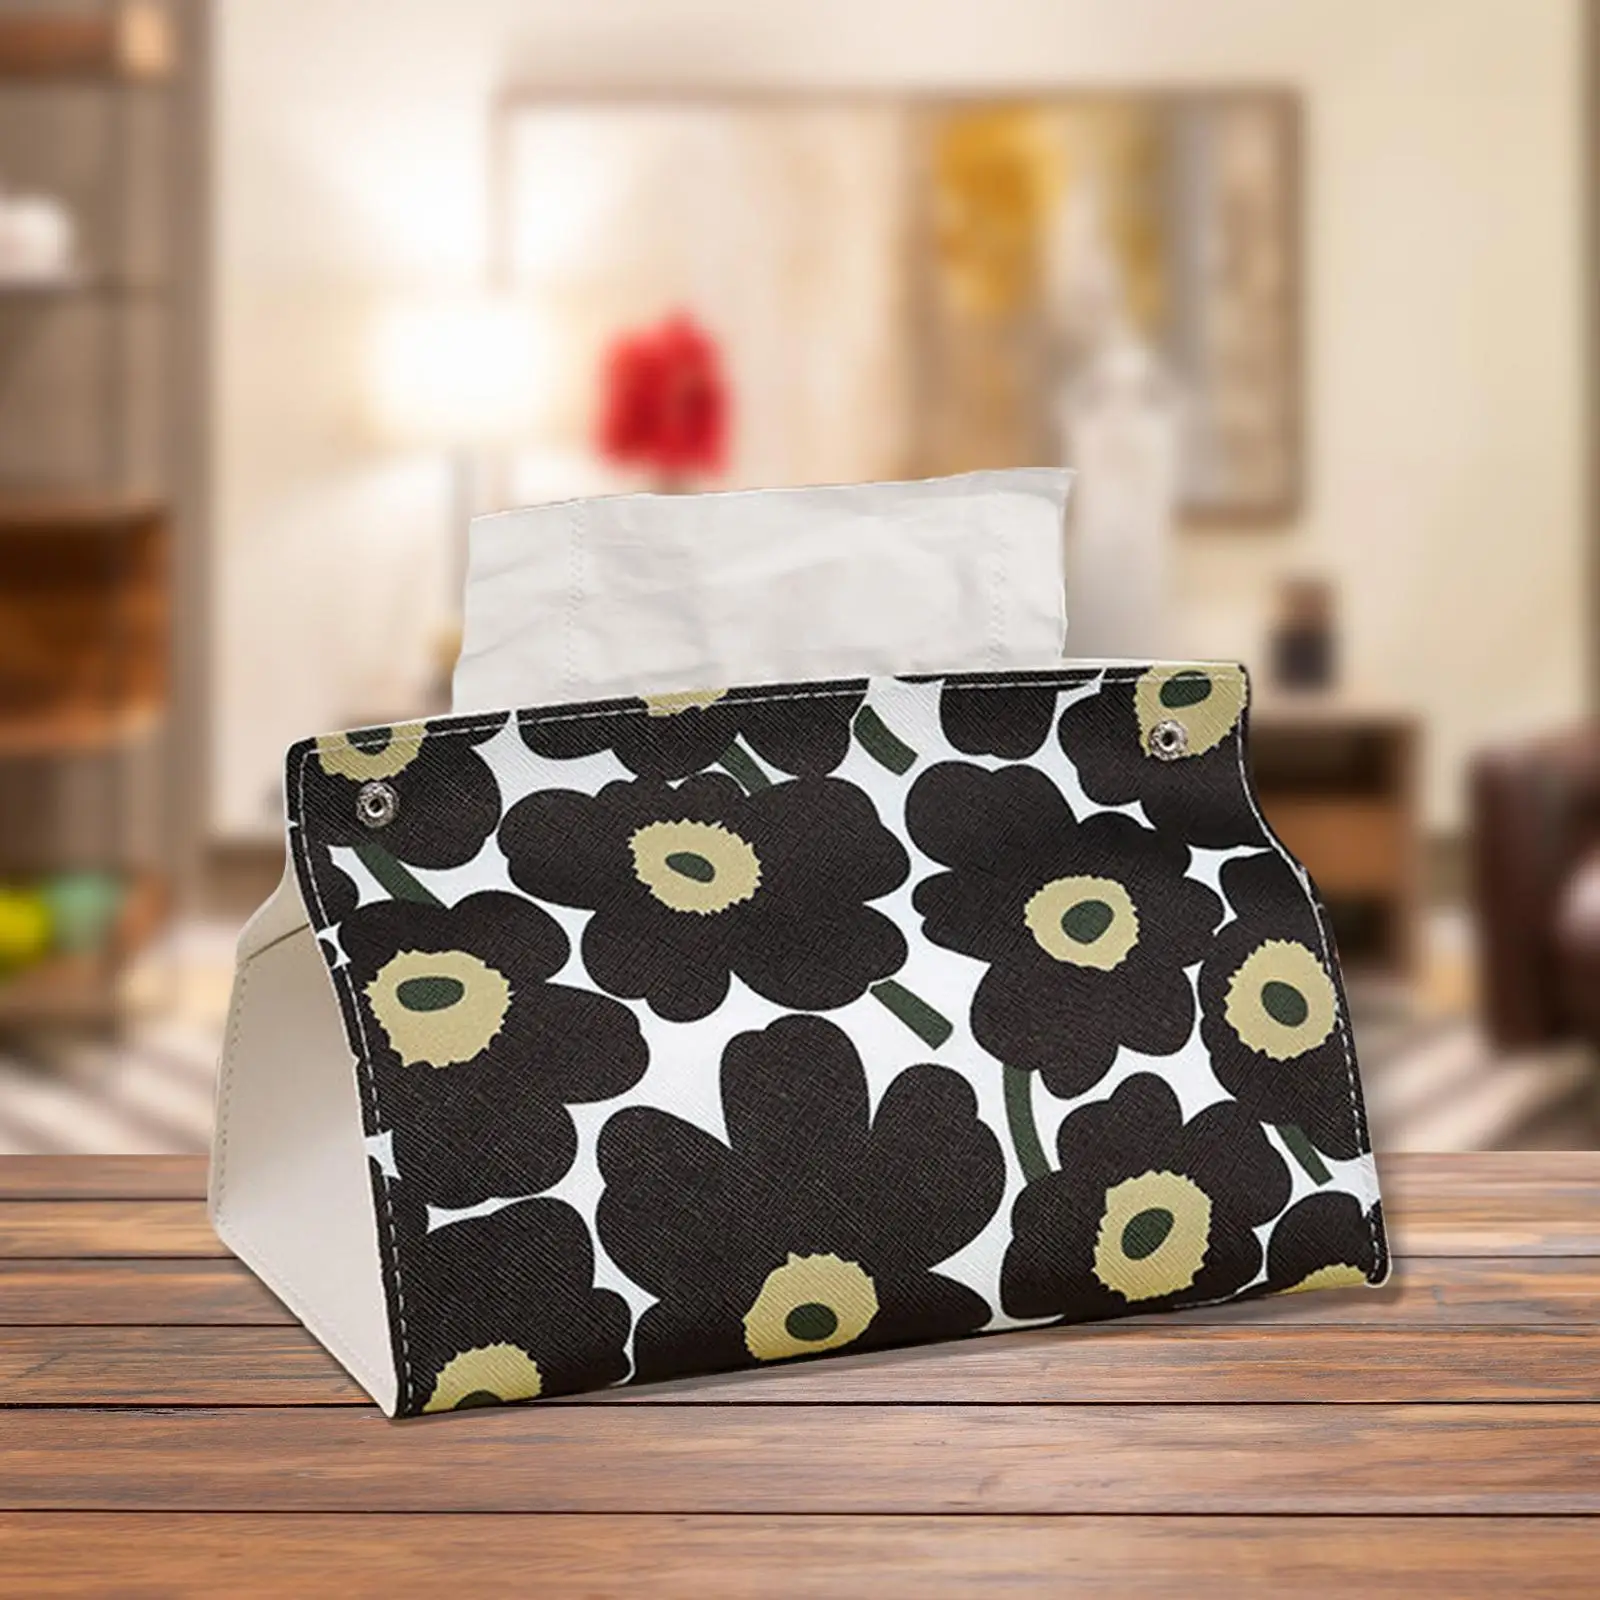 Tissue Box Supplies Bedroom PU Leather Accessories Storage Living Room